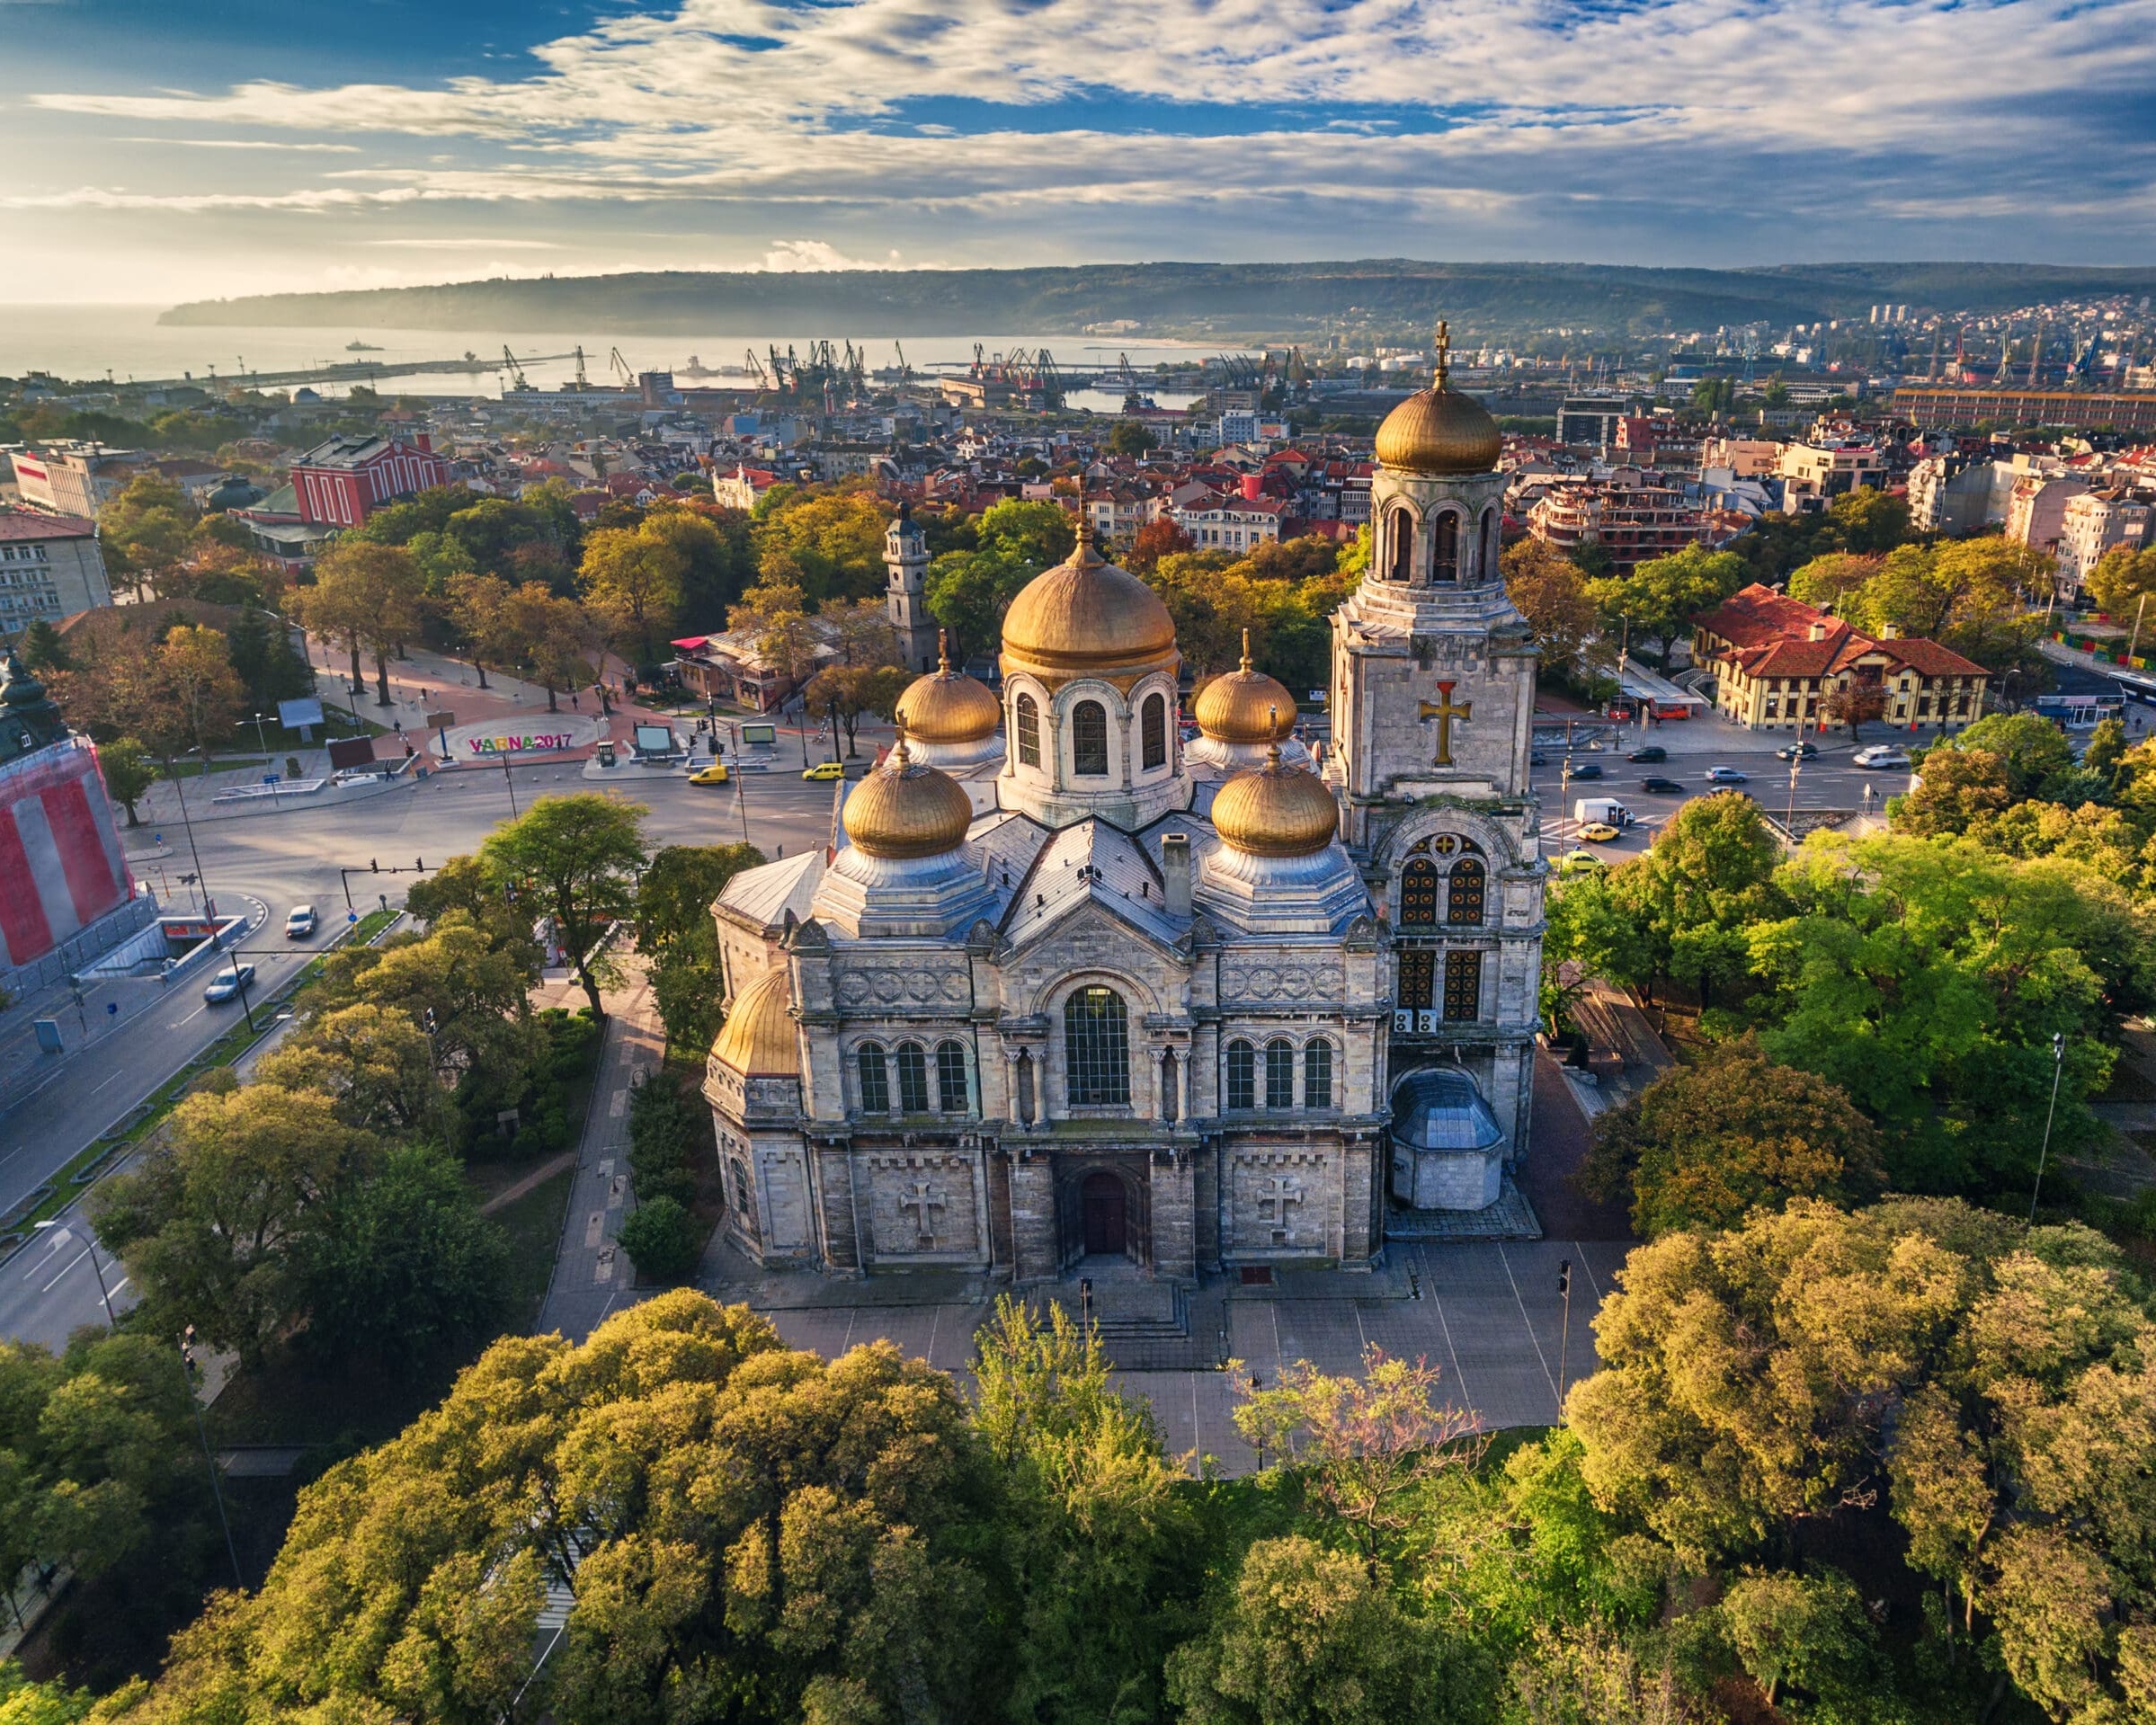 The Cathedral of the Assumption in Varna, Bulgaria